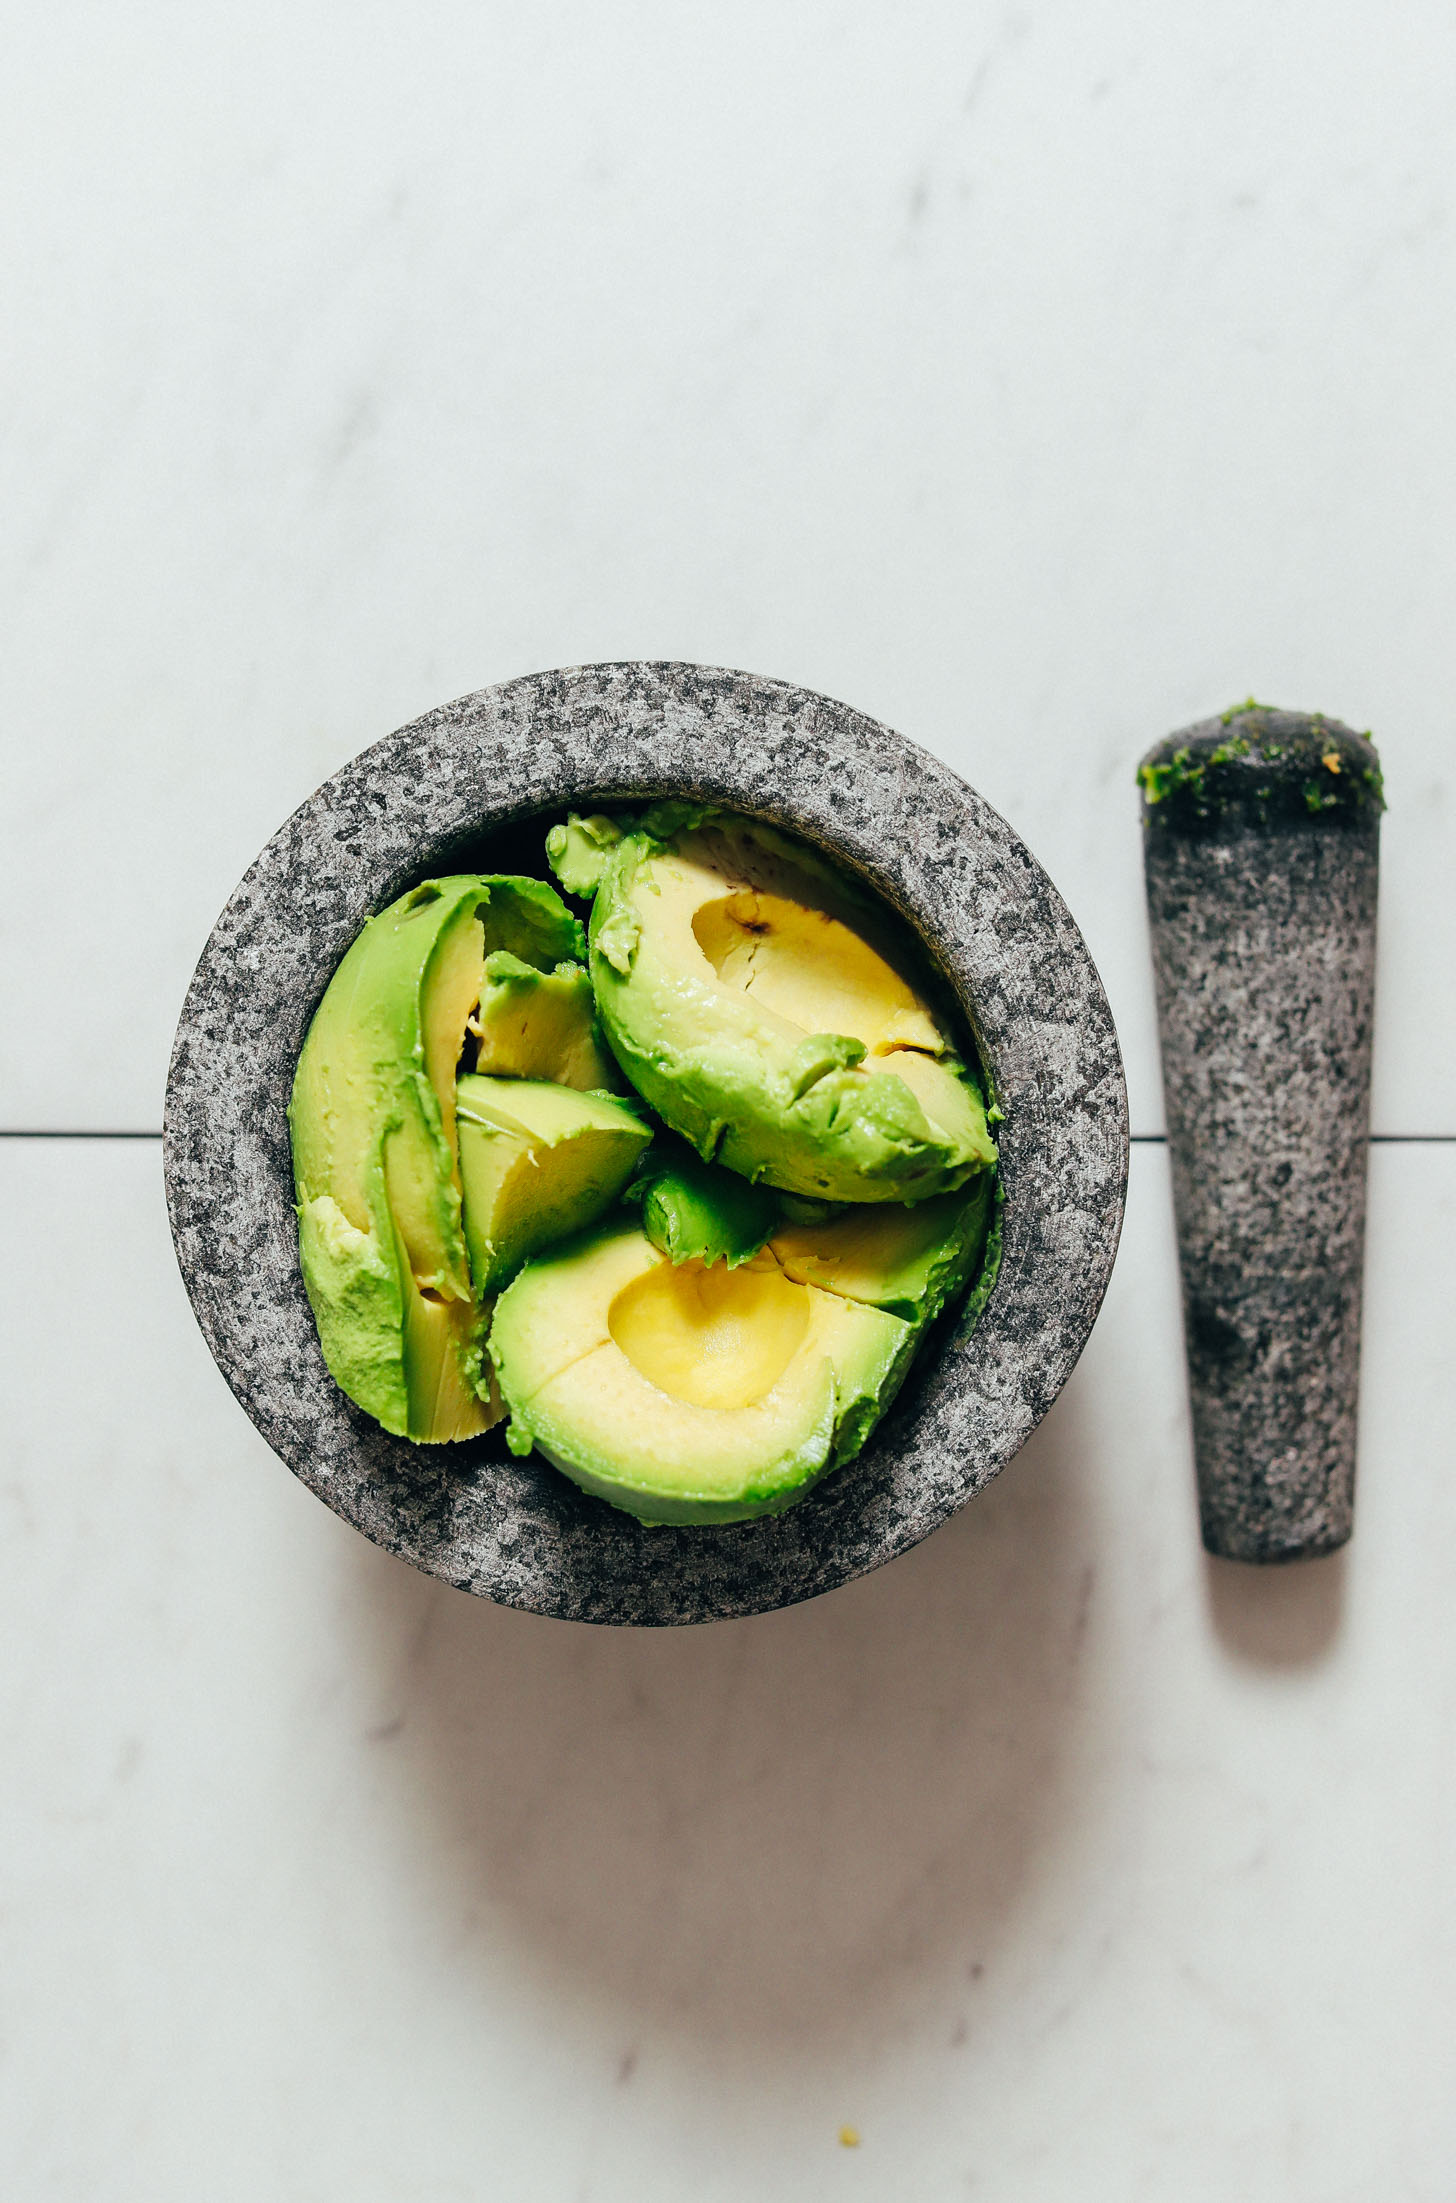 Avocados in a mortar and pestle for making homemade guacamole